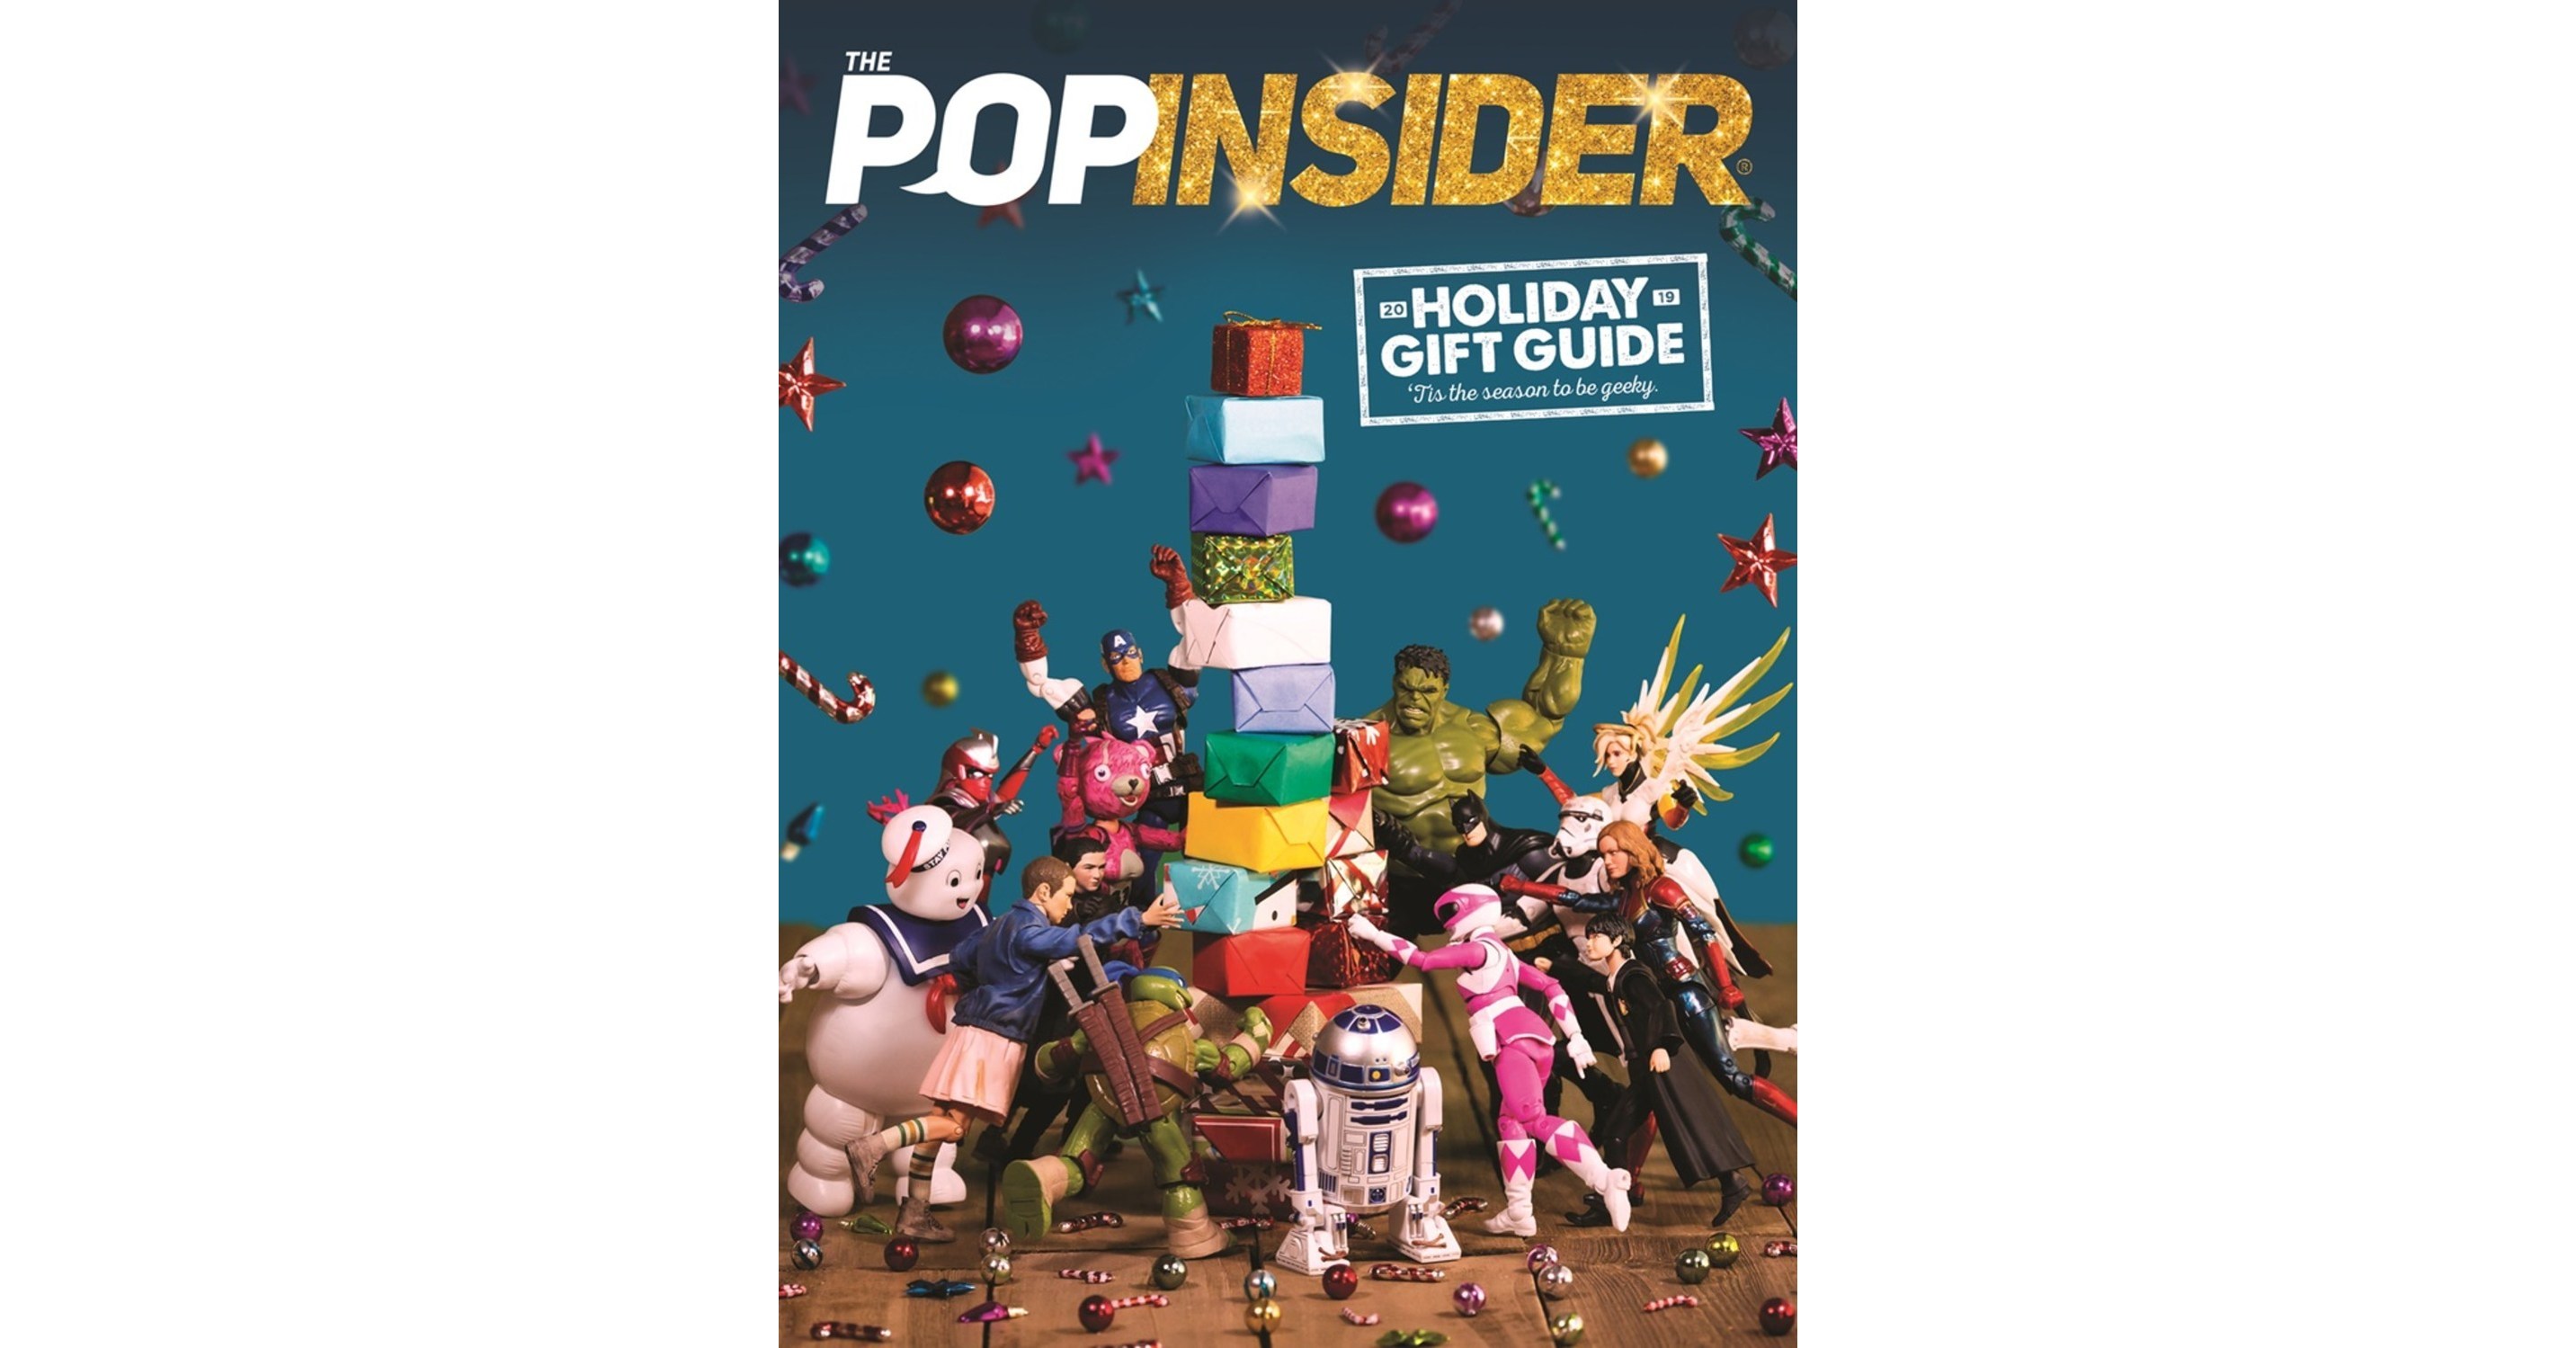 Thank you so much to Pop Insider for honoring our studio in the